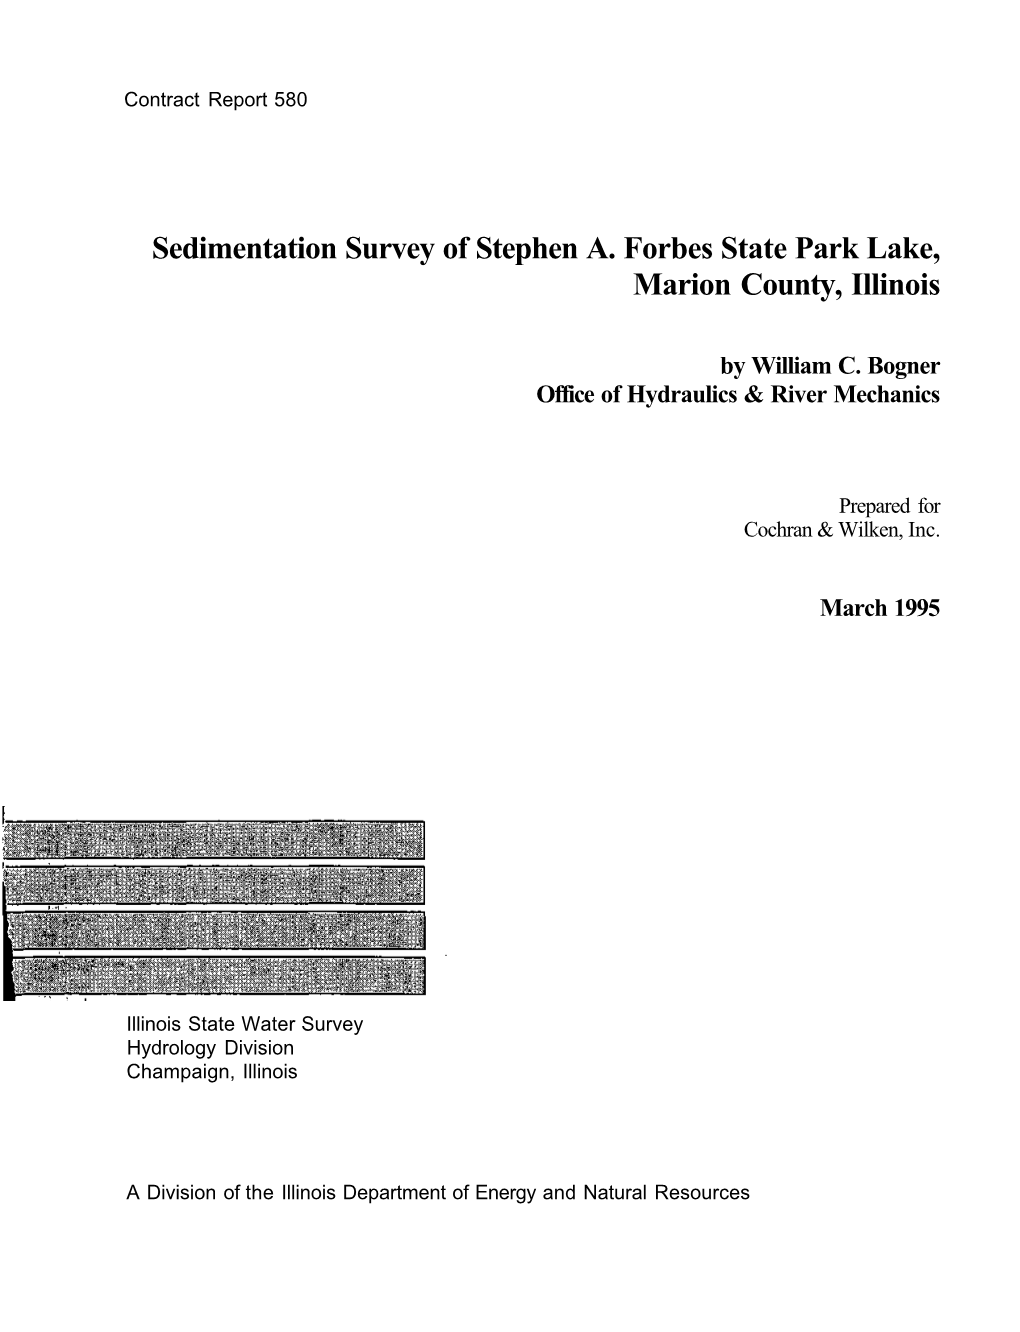 Sedimentation Survey of Stephen A. Forbes State Park Lake, Marion County, Illinois